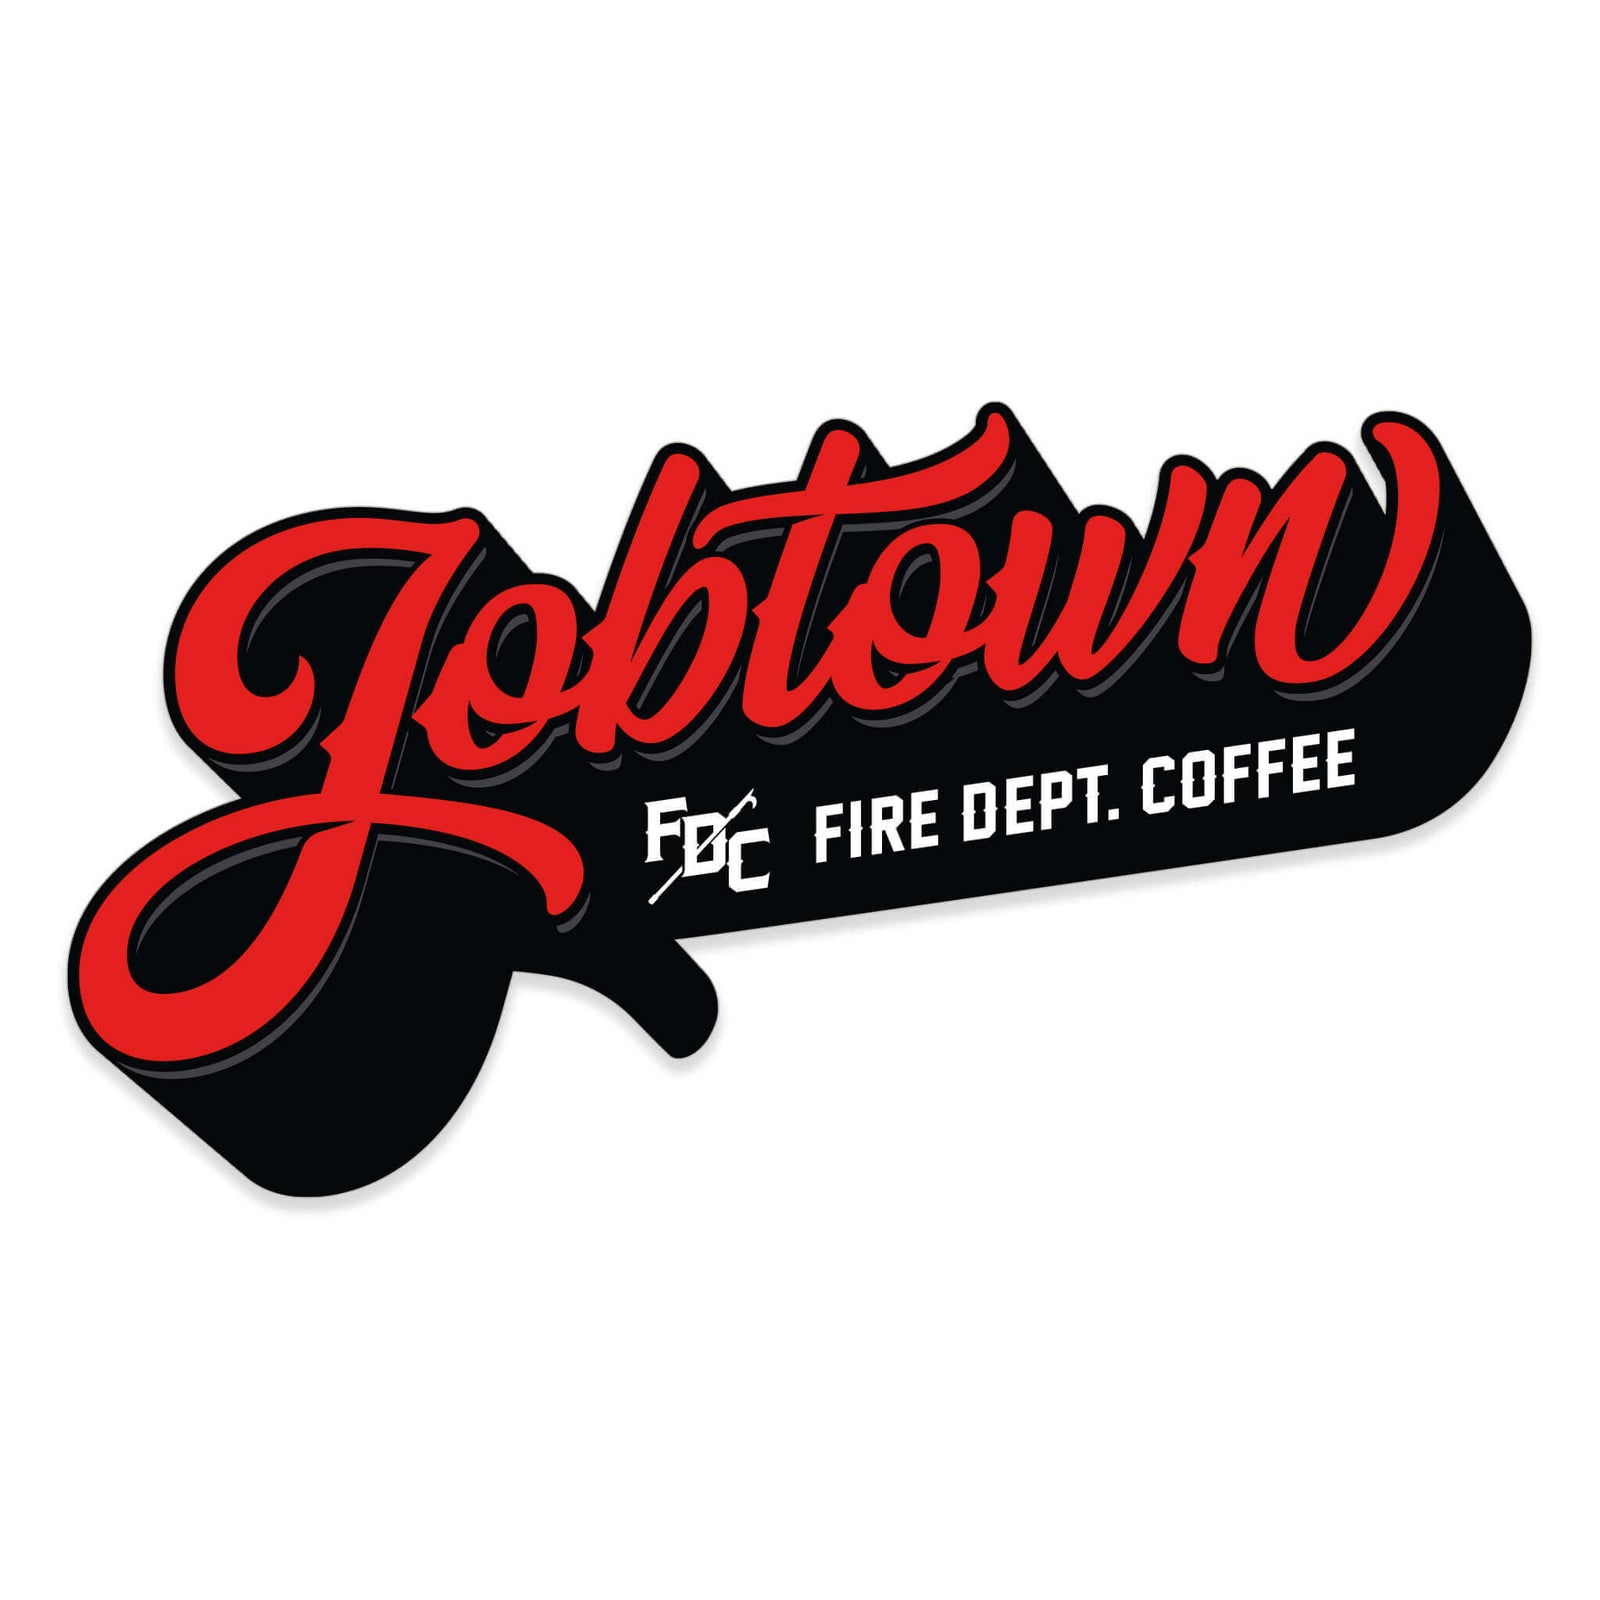 Sticker with "Jobtown" in red cursive lettering and "Fire Dept. Coffee" below with a white FDC Pike Pole logo.